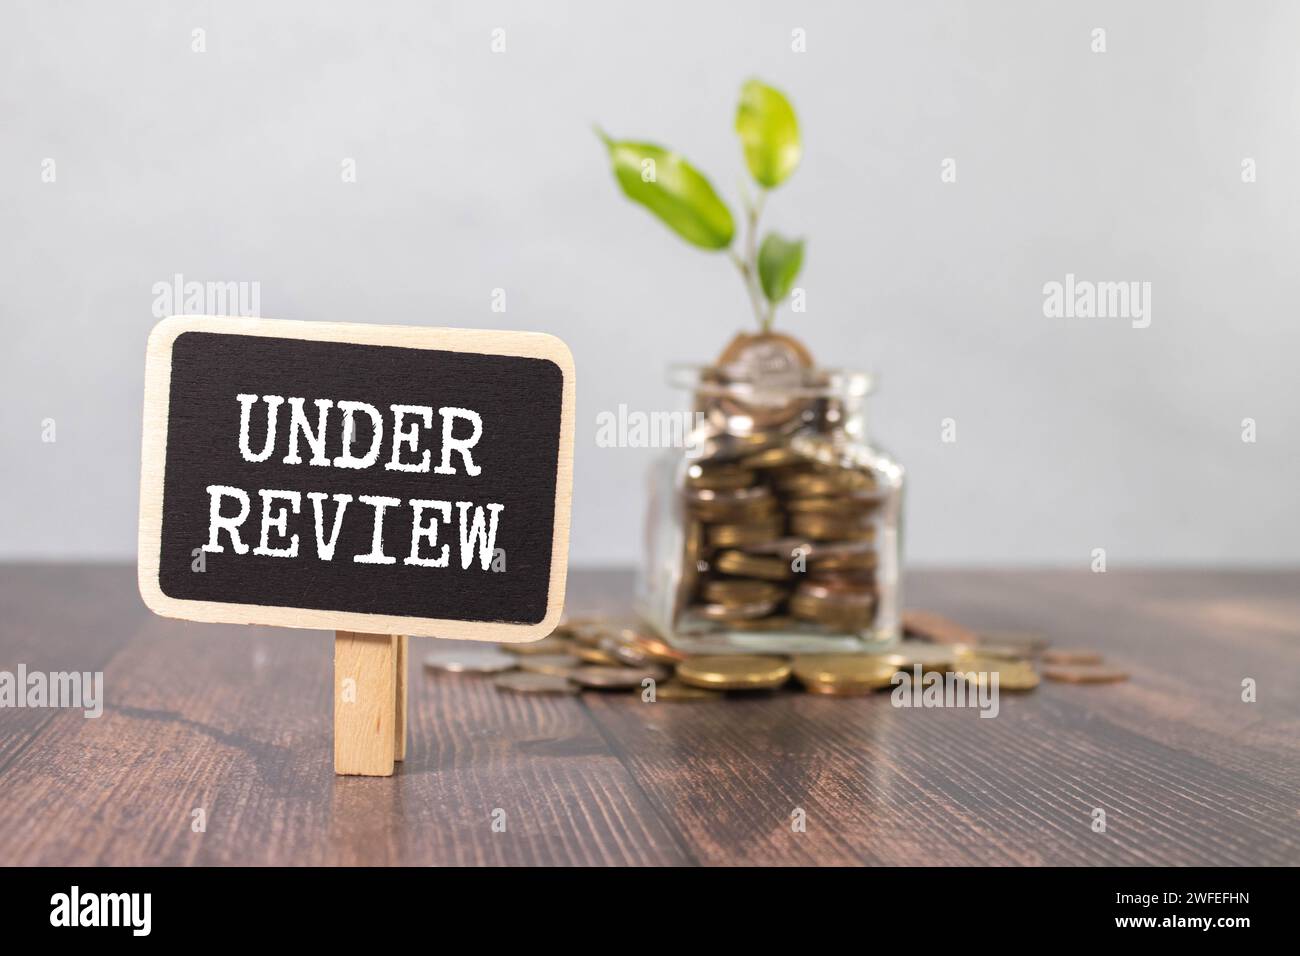 under review. text is written on white paper on a wooden table. Stock Photo